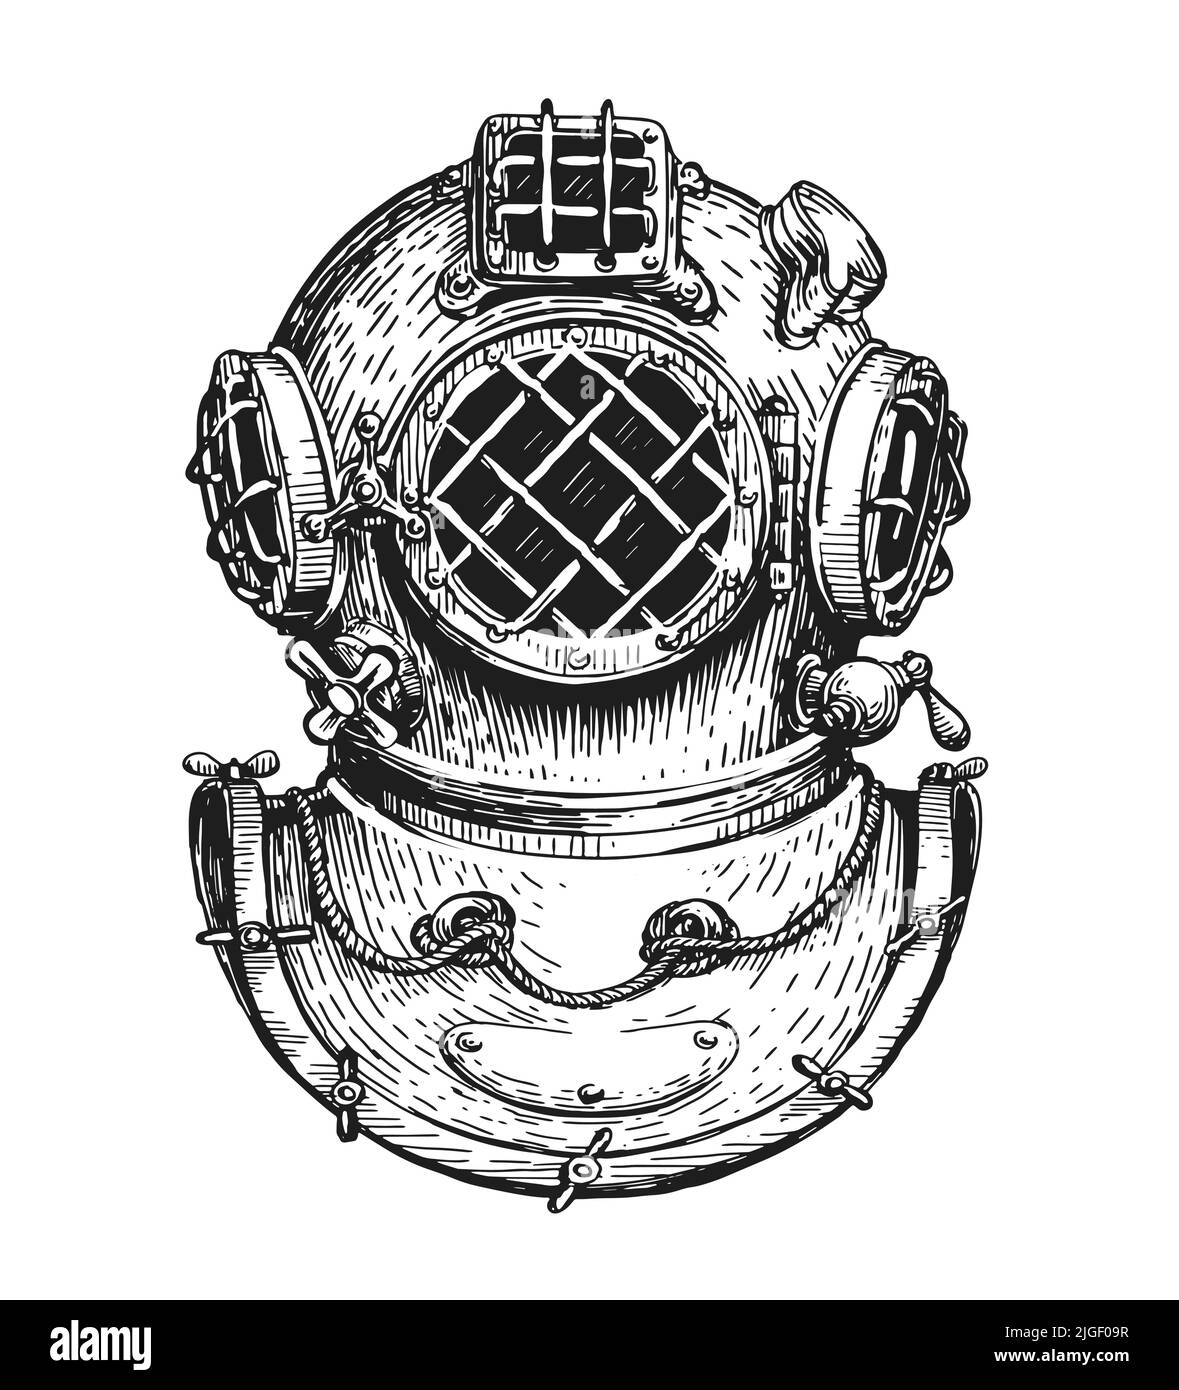 Vintage diver helmet sketch. Sea diving concept. Nautical vector illustration drawn in old engraving style Stock Vector